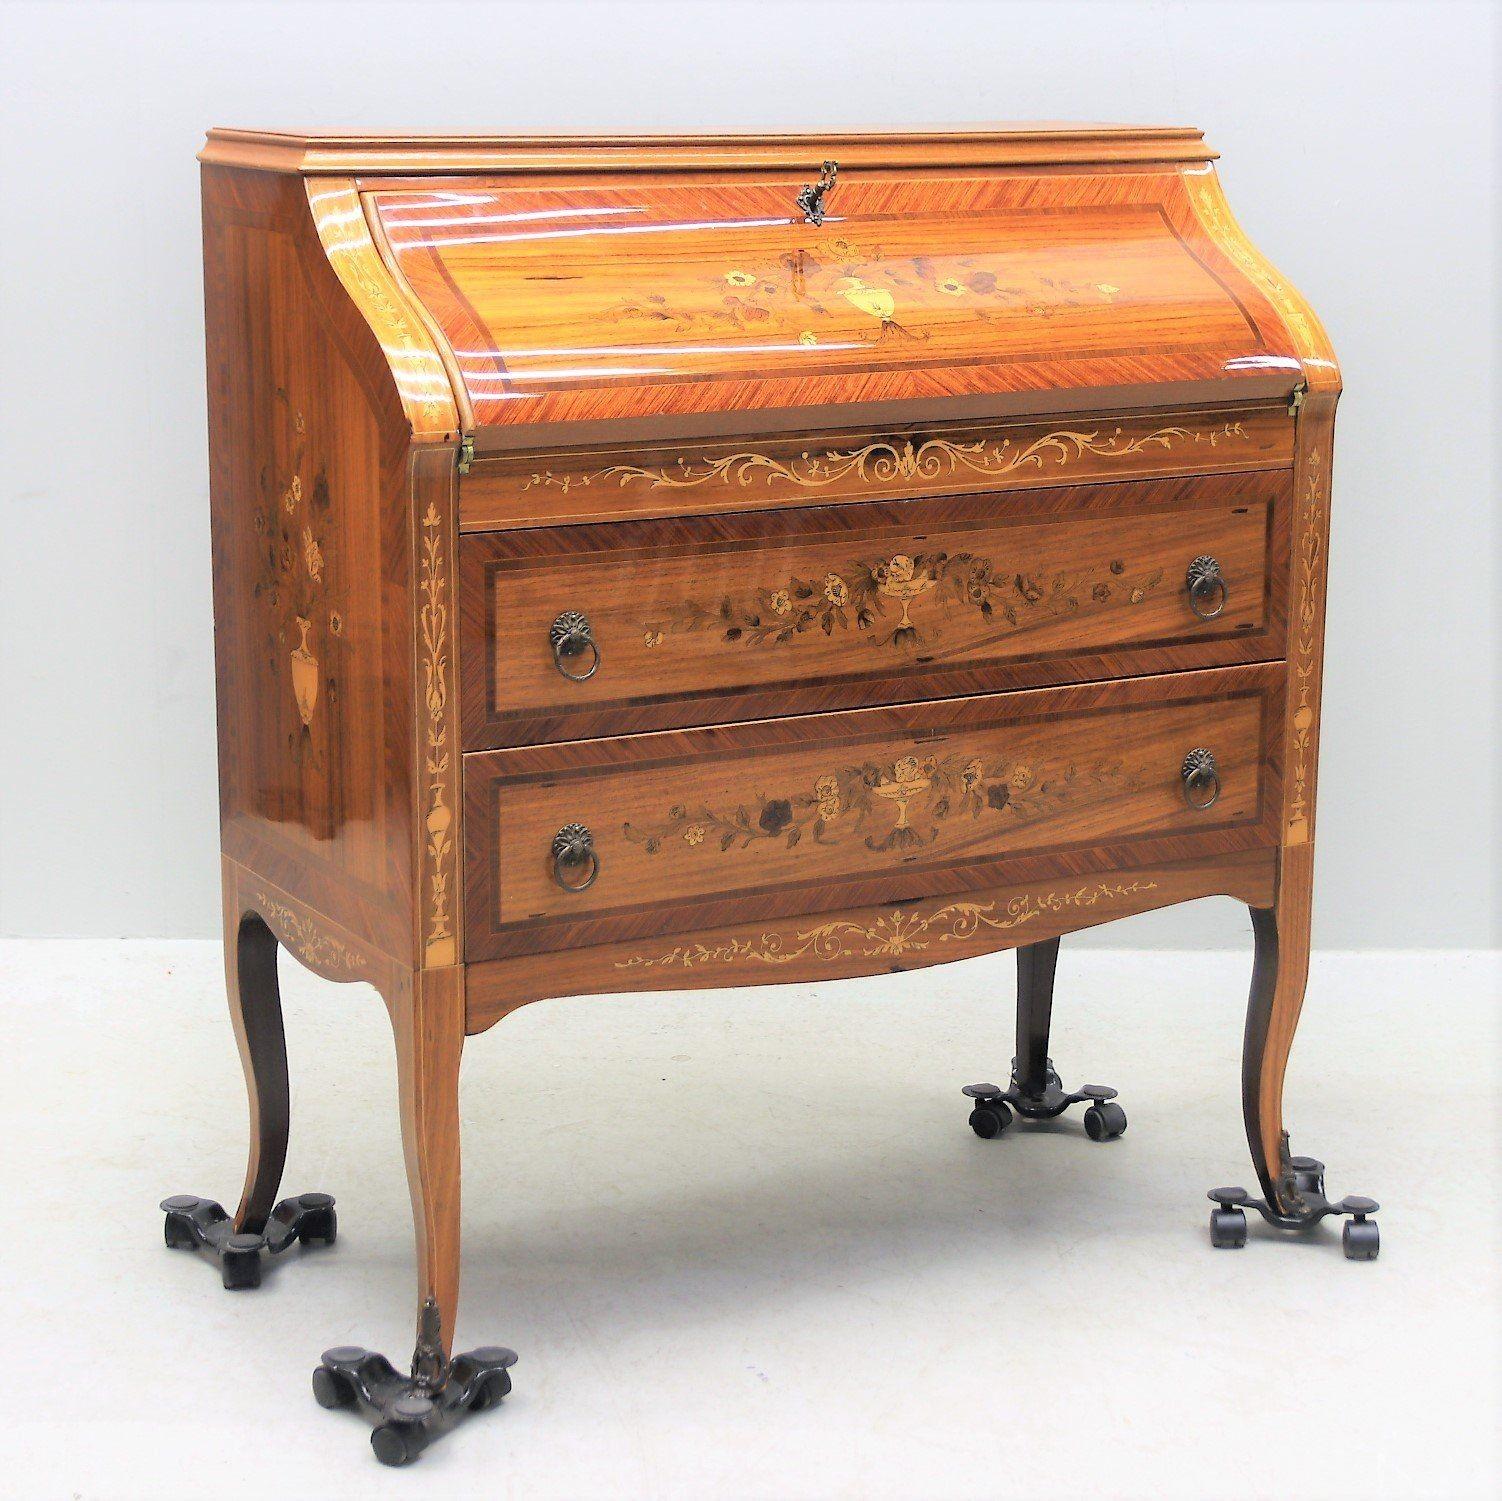 Bring the grandeur into your home with this fantastic secretary desk with stunning marquetry design from the first half of the 20th century. With intricate inlay work and nearly perfect shiny finish, it's graceful curves and original gorgeous